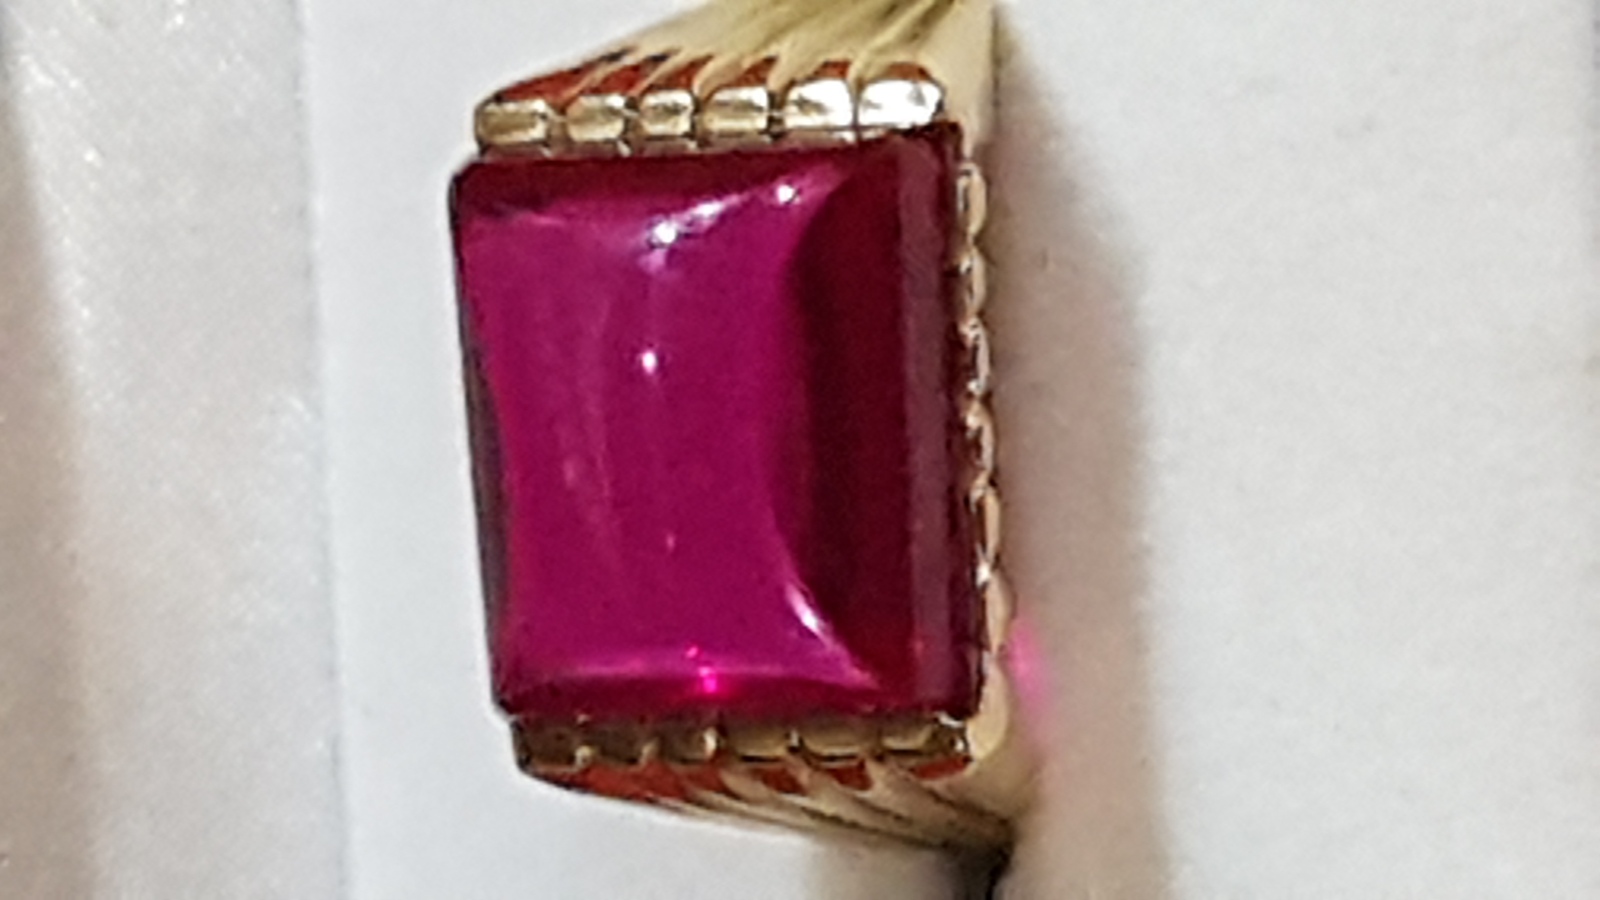 9ct Gold Signet Ring Set With Large Ruby Stone